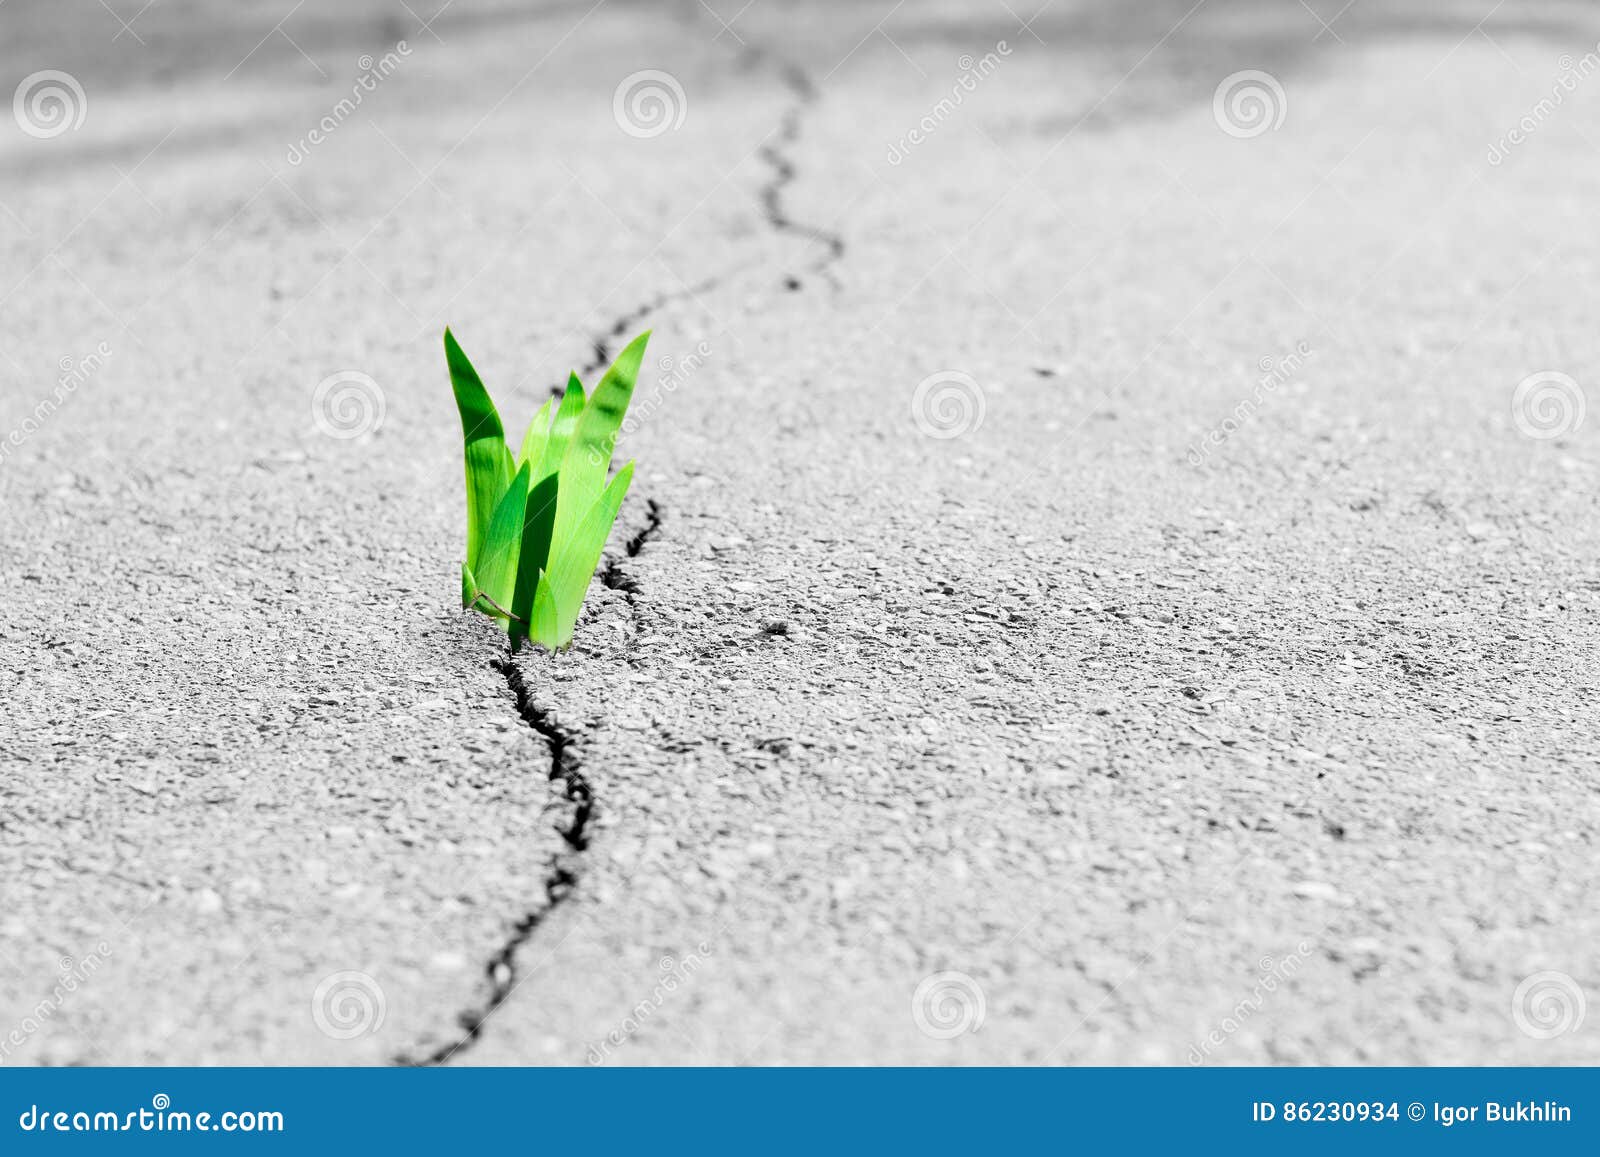 small tree breaks through the pavement. green sprout of a plant makes the way through a crack asphalt.